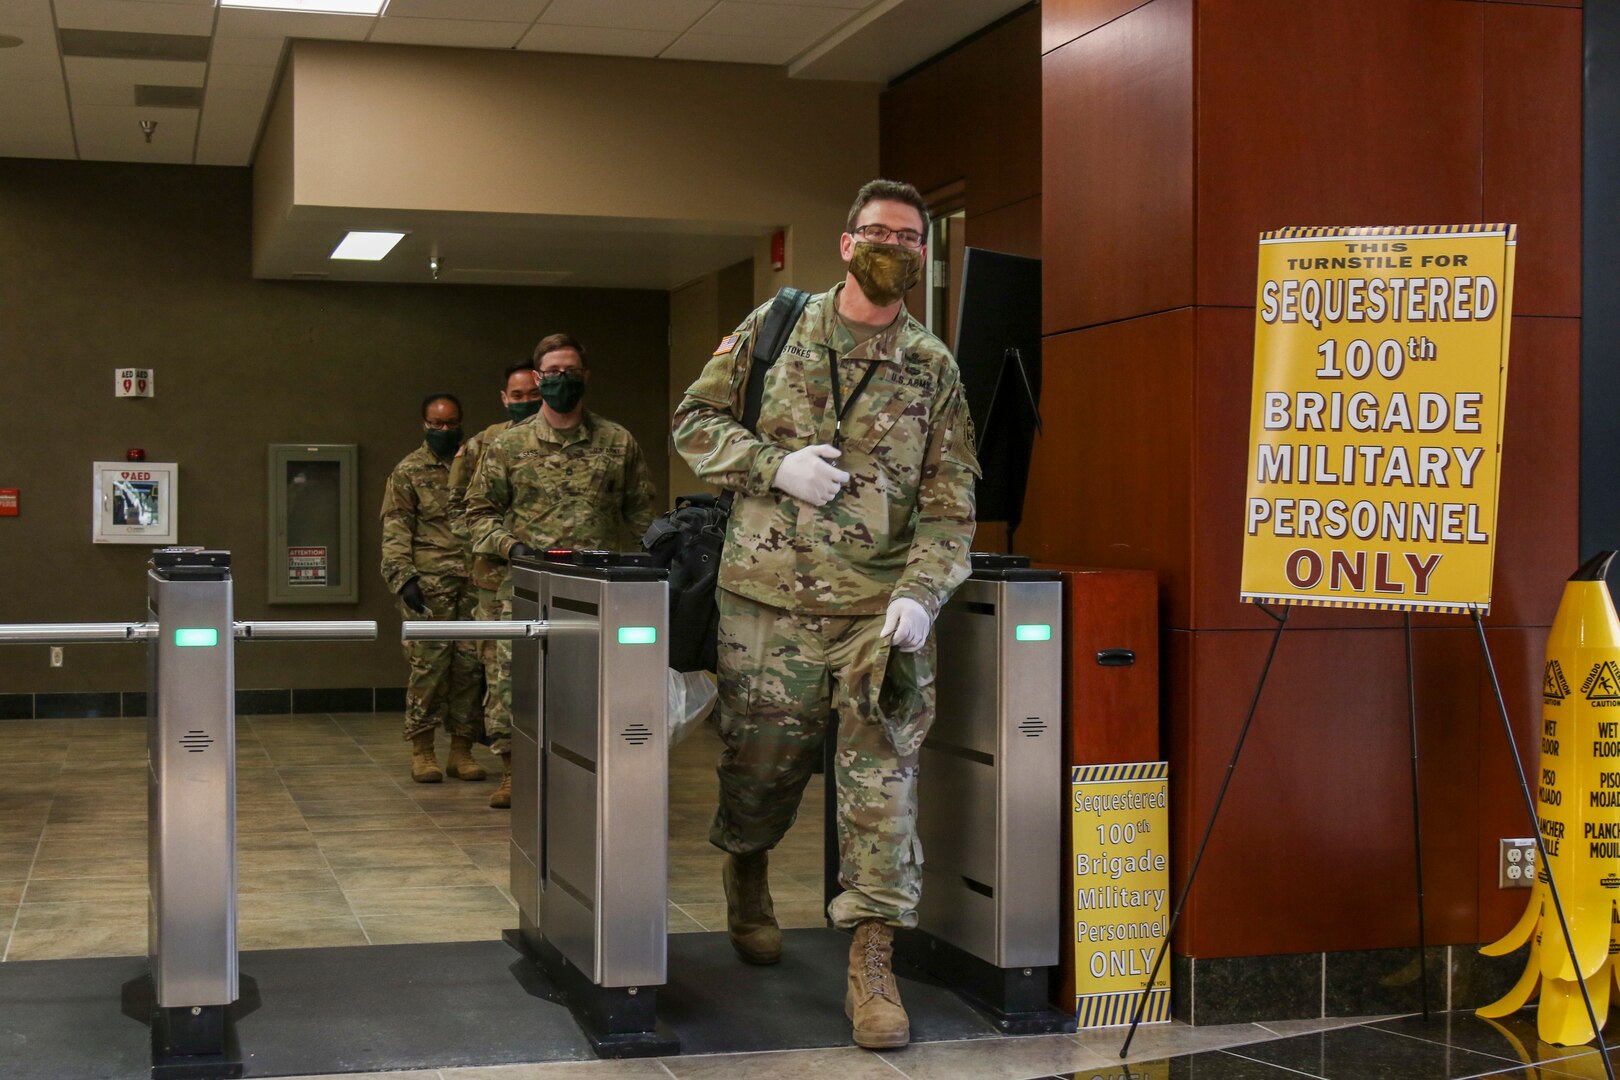 Members of a 100th Missile Defense Brigade crew exit the secure area at Schriever Air Force Base following their shift April 30, 2020. Since the onset of the pandemic, the 100th Brigade has implemented measures to ensure the continued execution of its mission including sequestering crew members away from their homes and families.